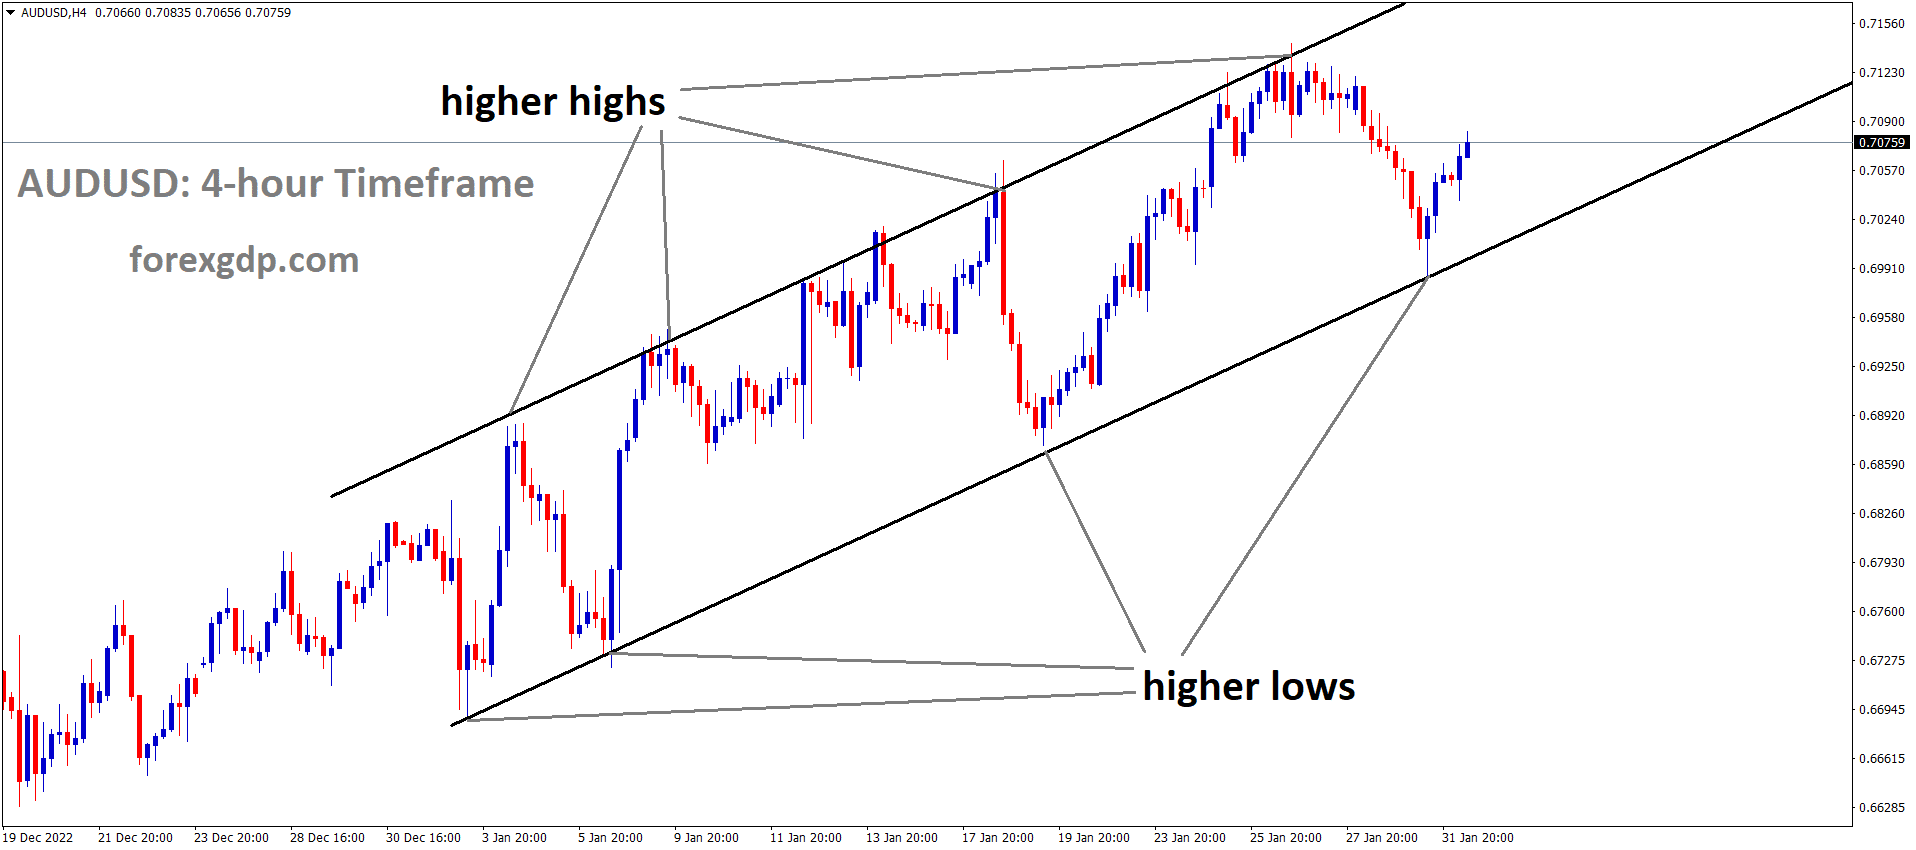 AUDUSD is moving in an Ascending Channel and the market has rebounded from the higher low area of the channel